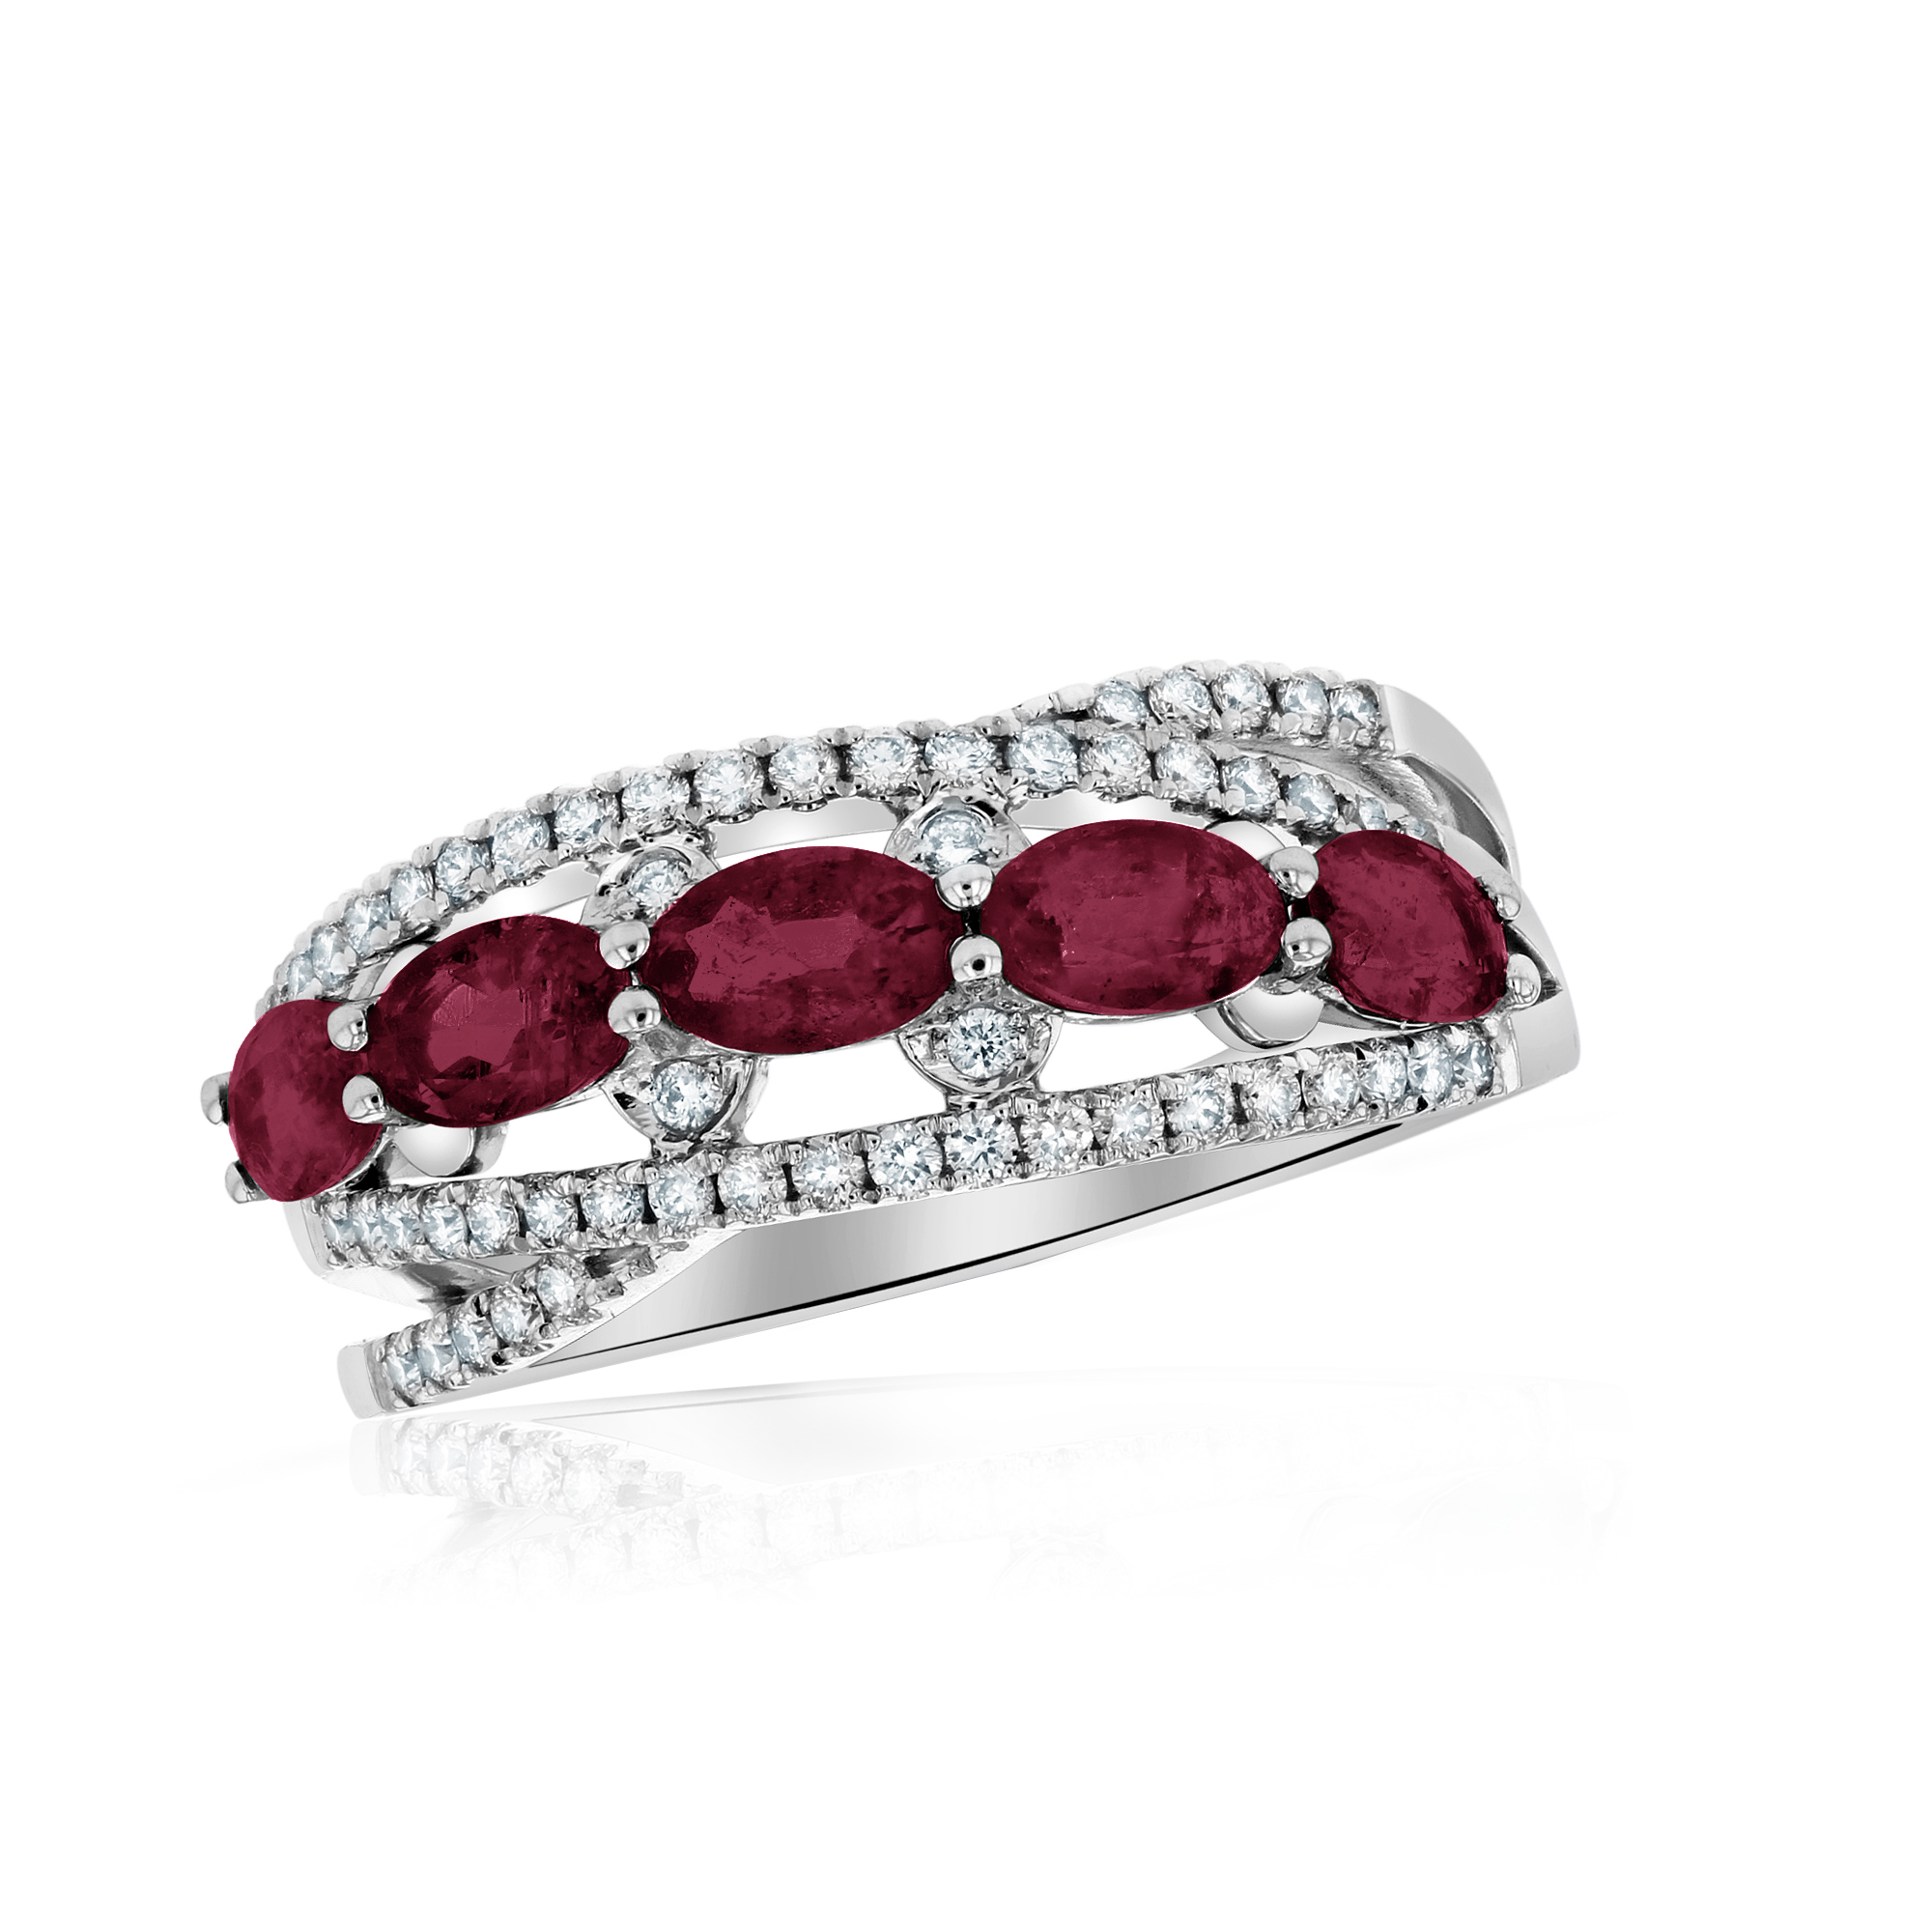 1.81ctw Diamond and Ruby Ring in 14k White Gold